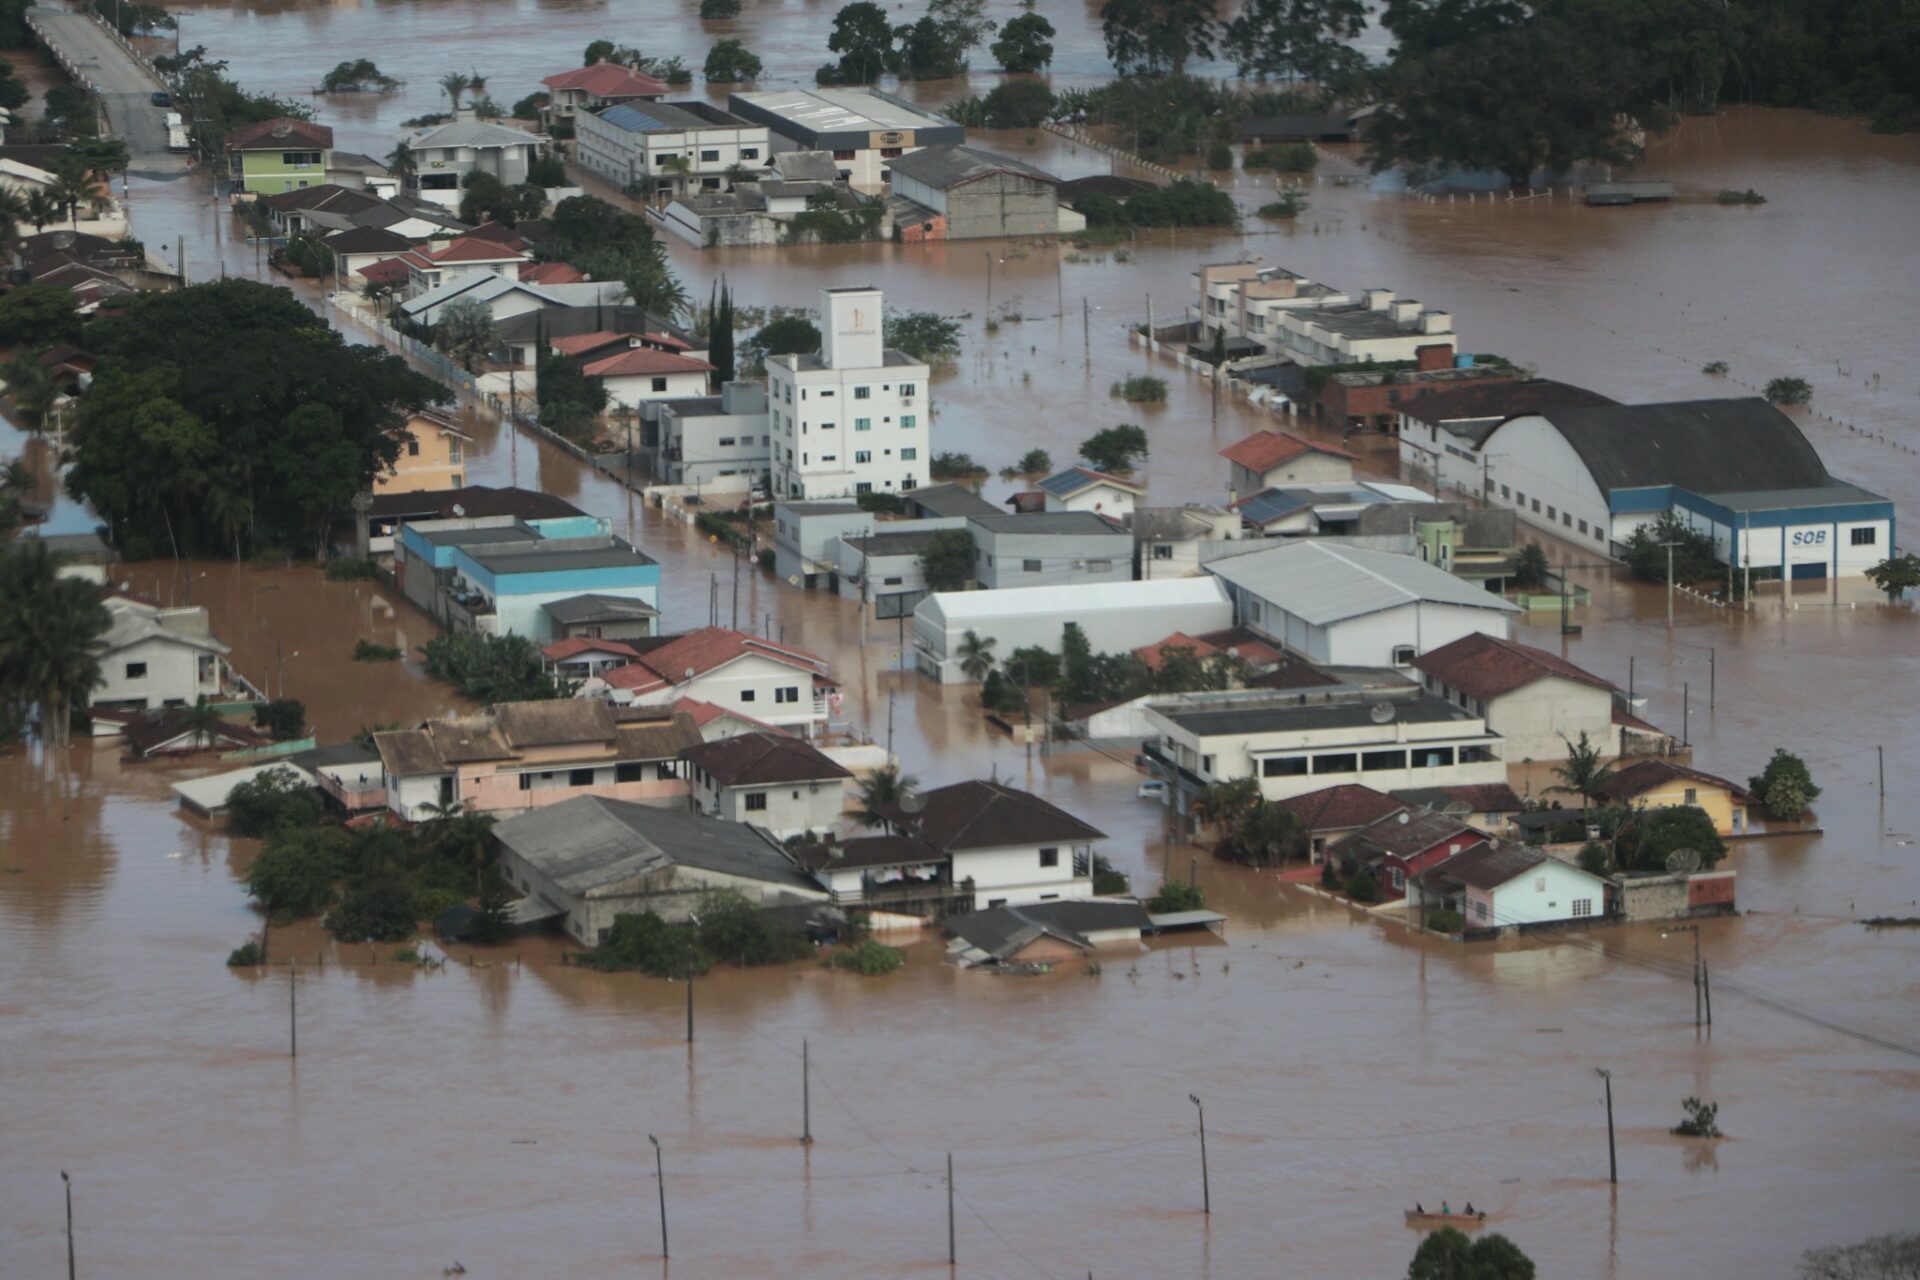 Floods caused by intense rains in Santa Catarina